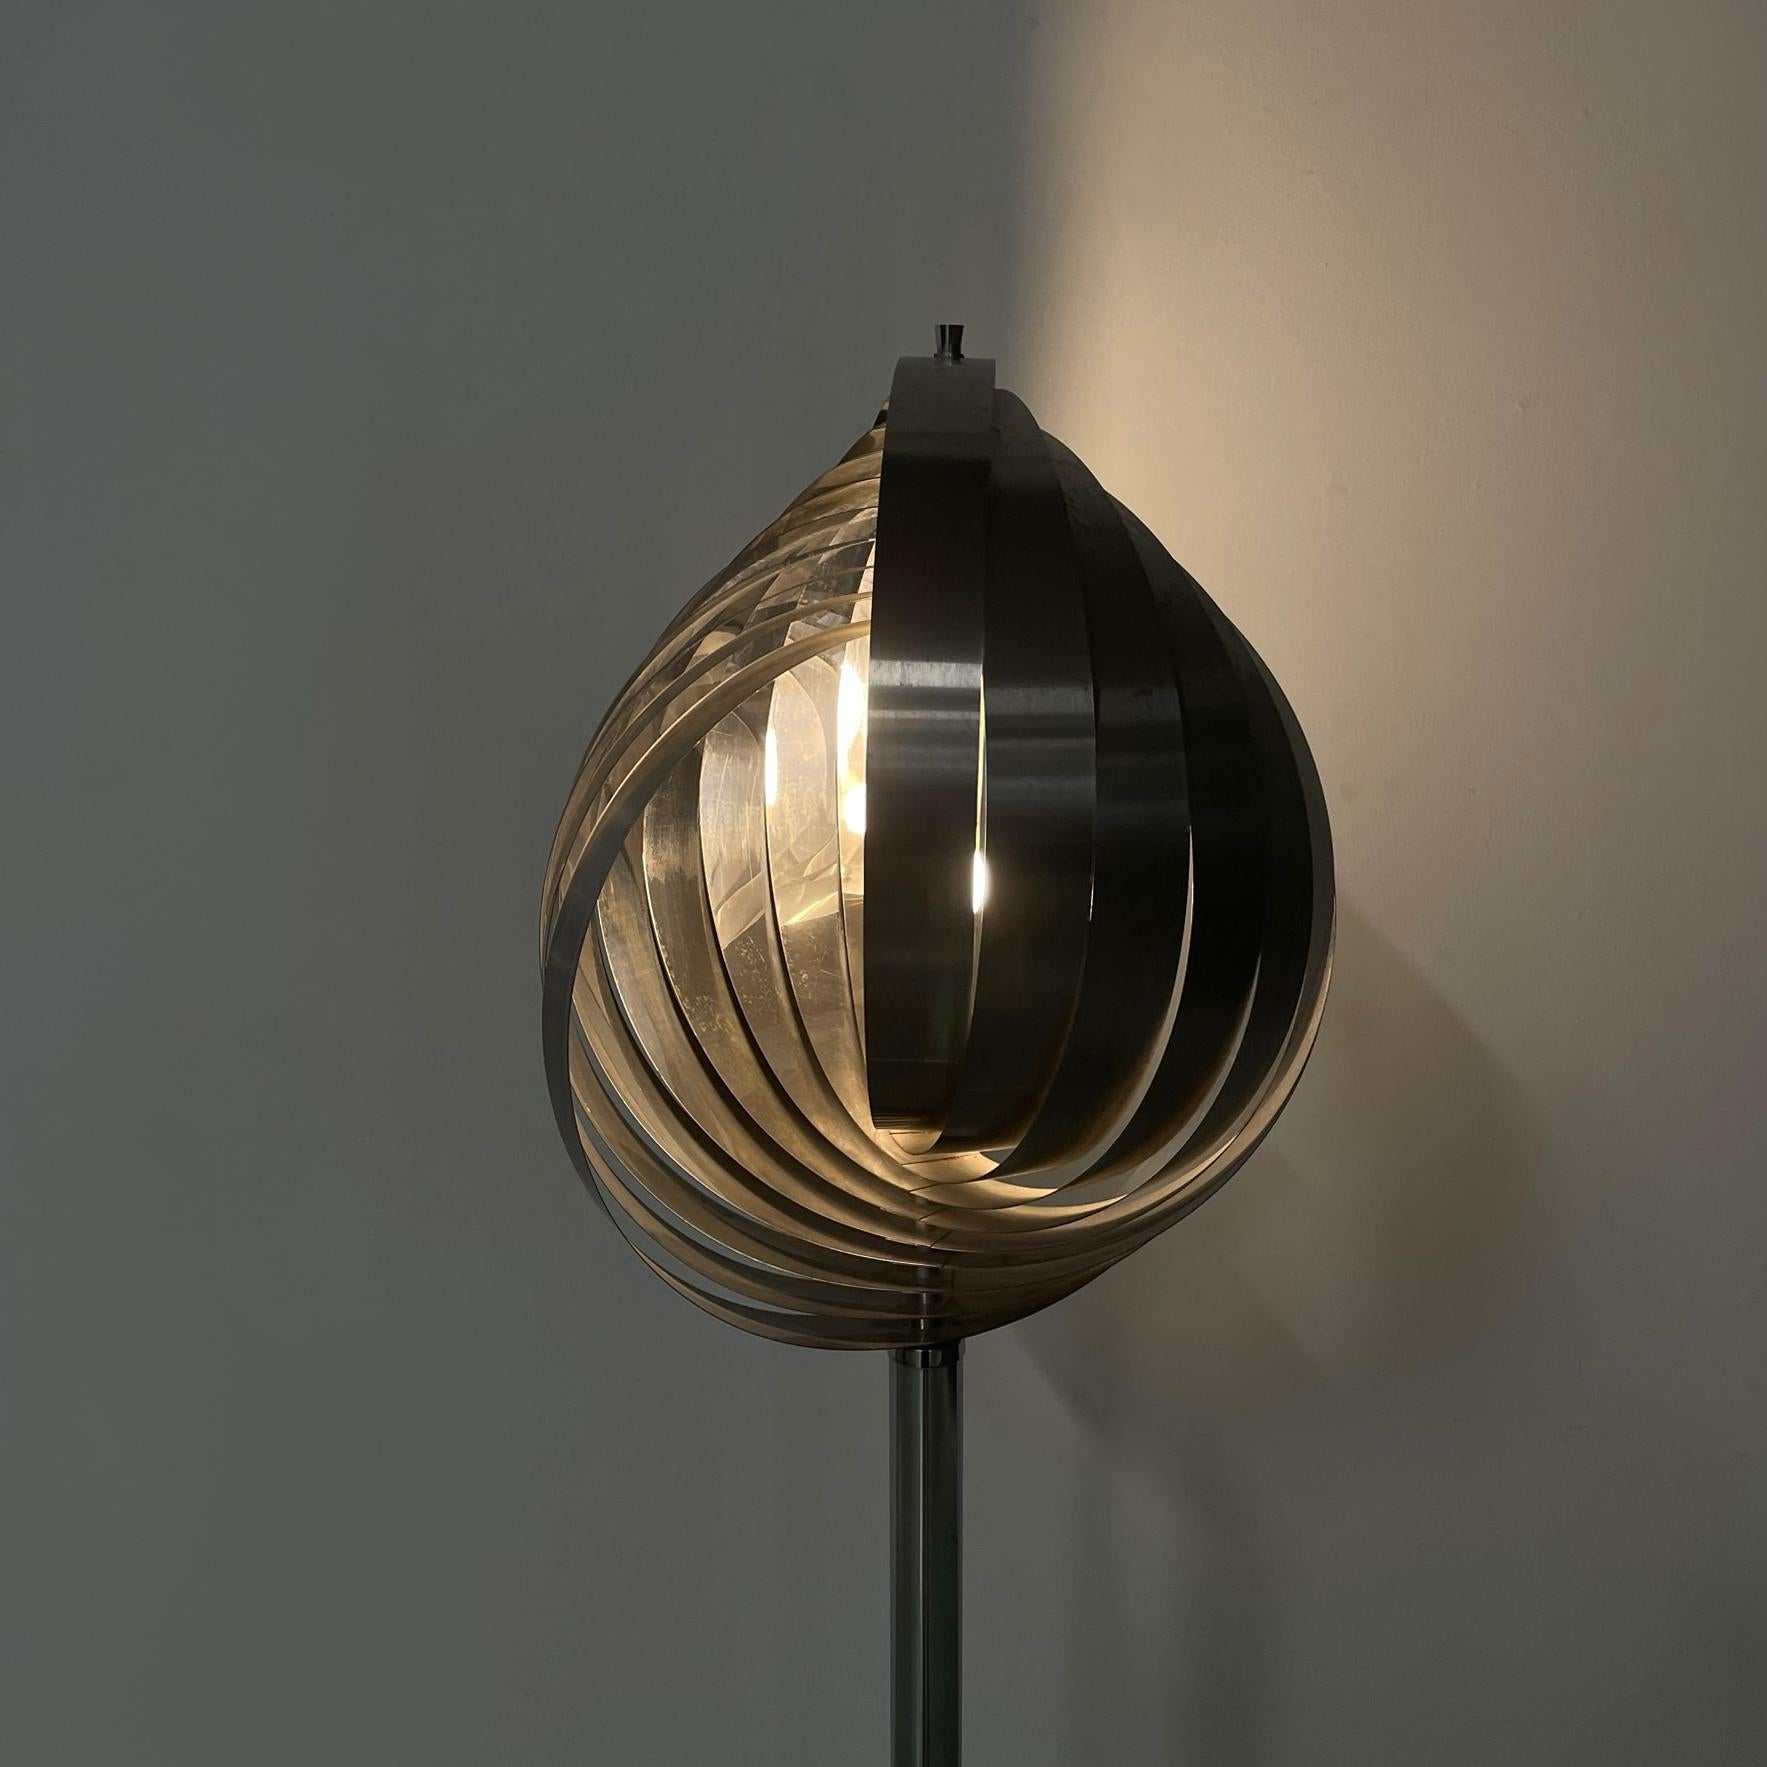 Late 20th Century French mid-century modern Steel spiral floor lamp Moon by Henri Mathieu, 1960s